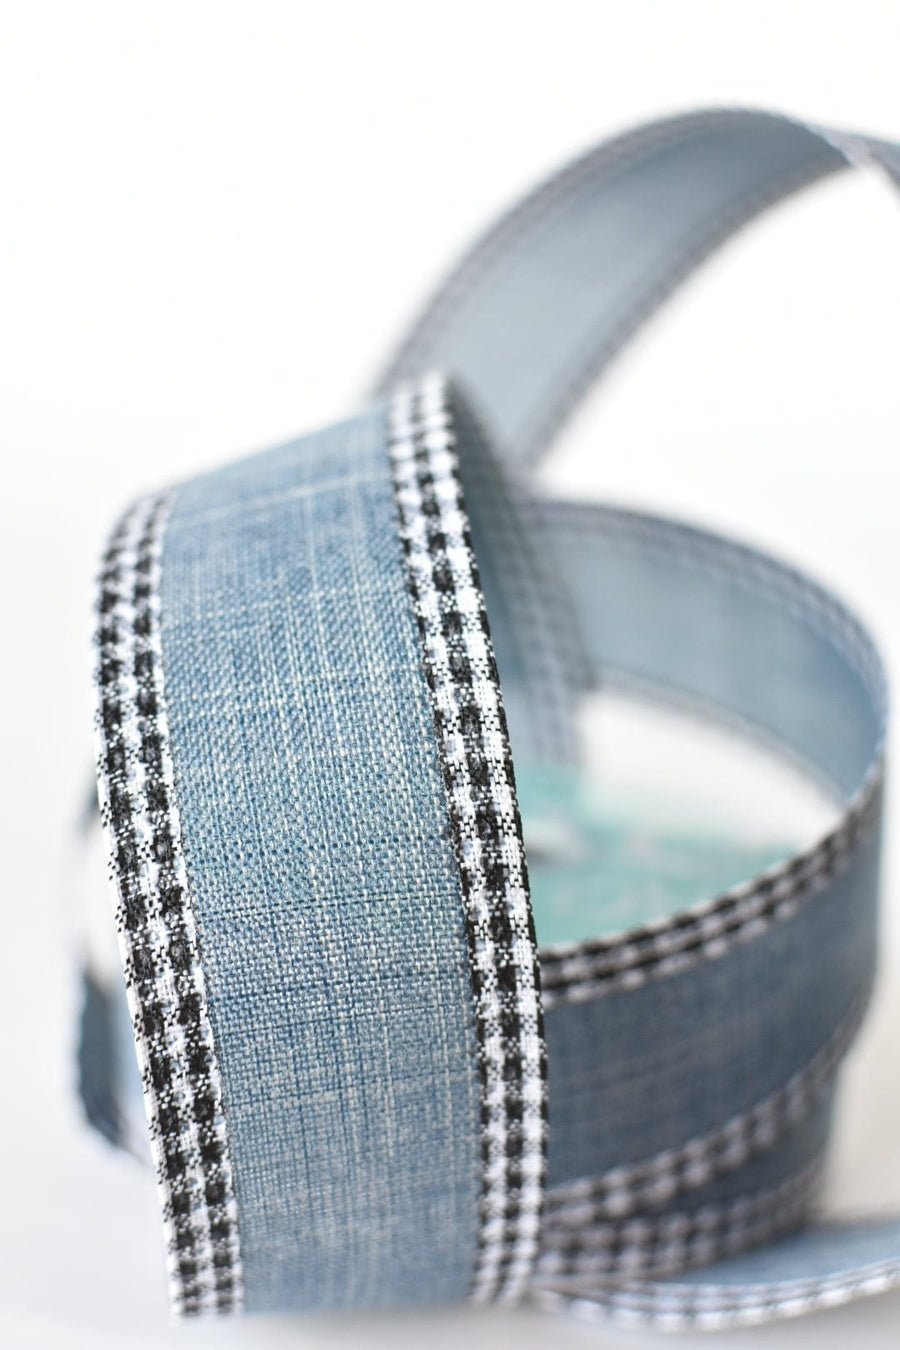 1 1/2" x 10yd Denim Faux Linen with Check Border